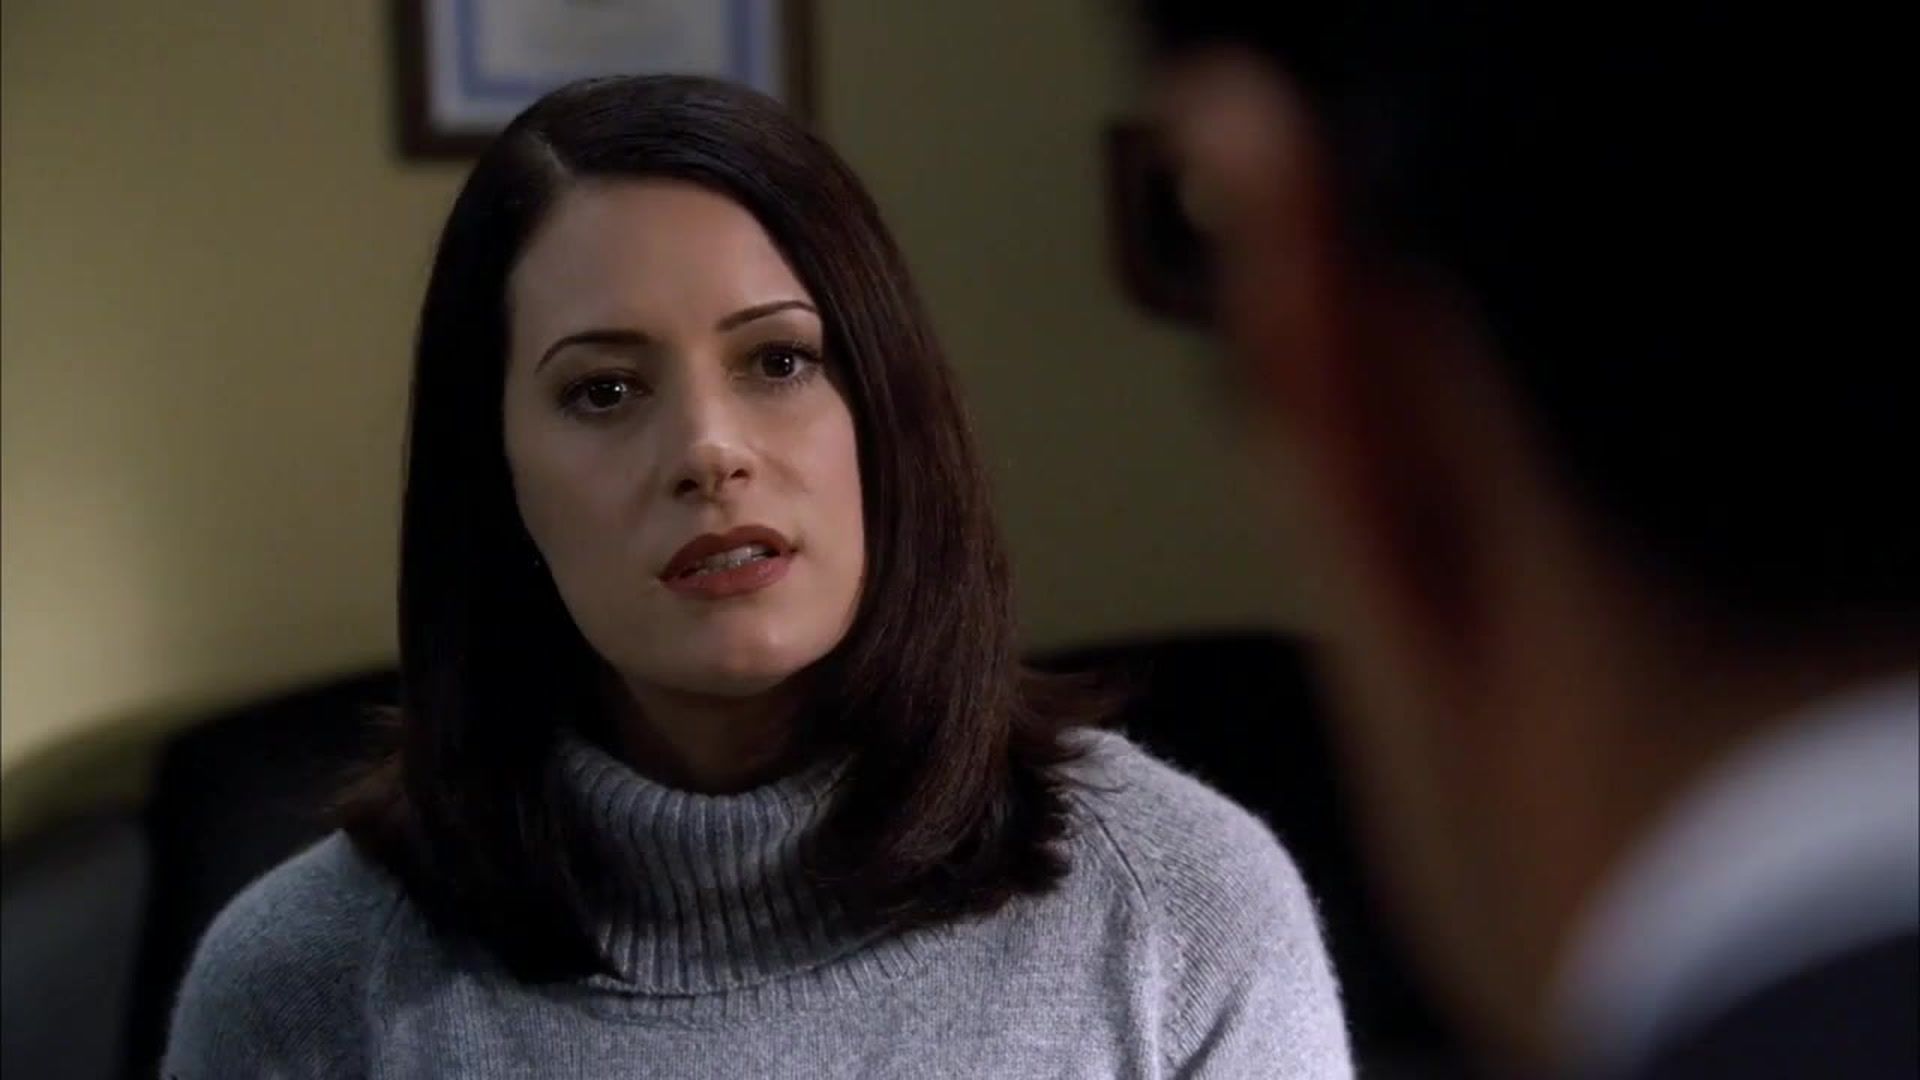 Emily Prentiss confronting Hotch about his hostility towards her on Criminal Minds